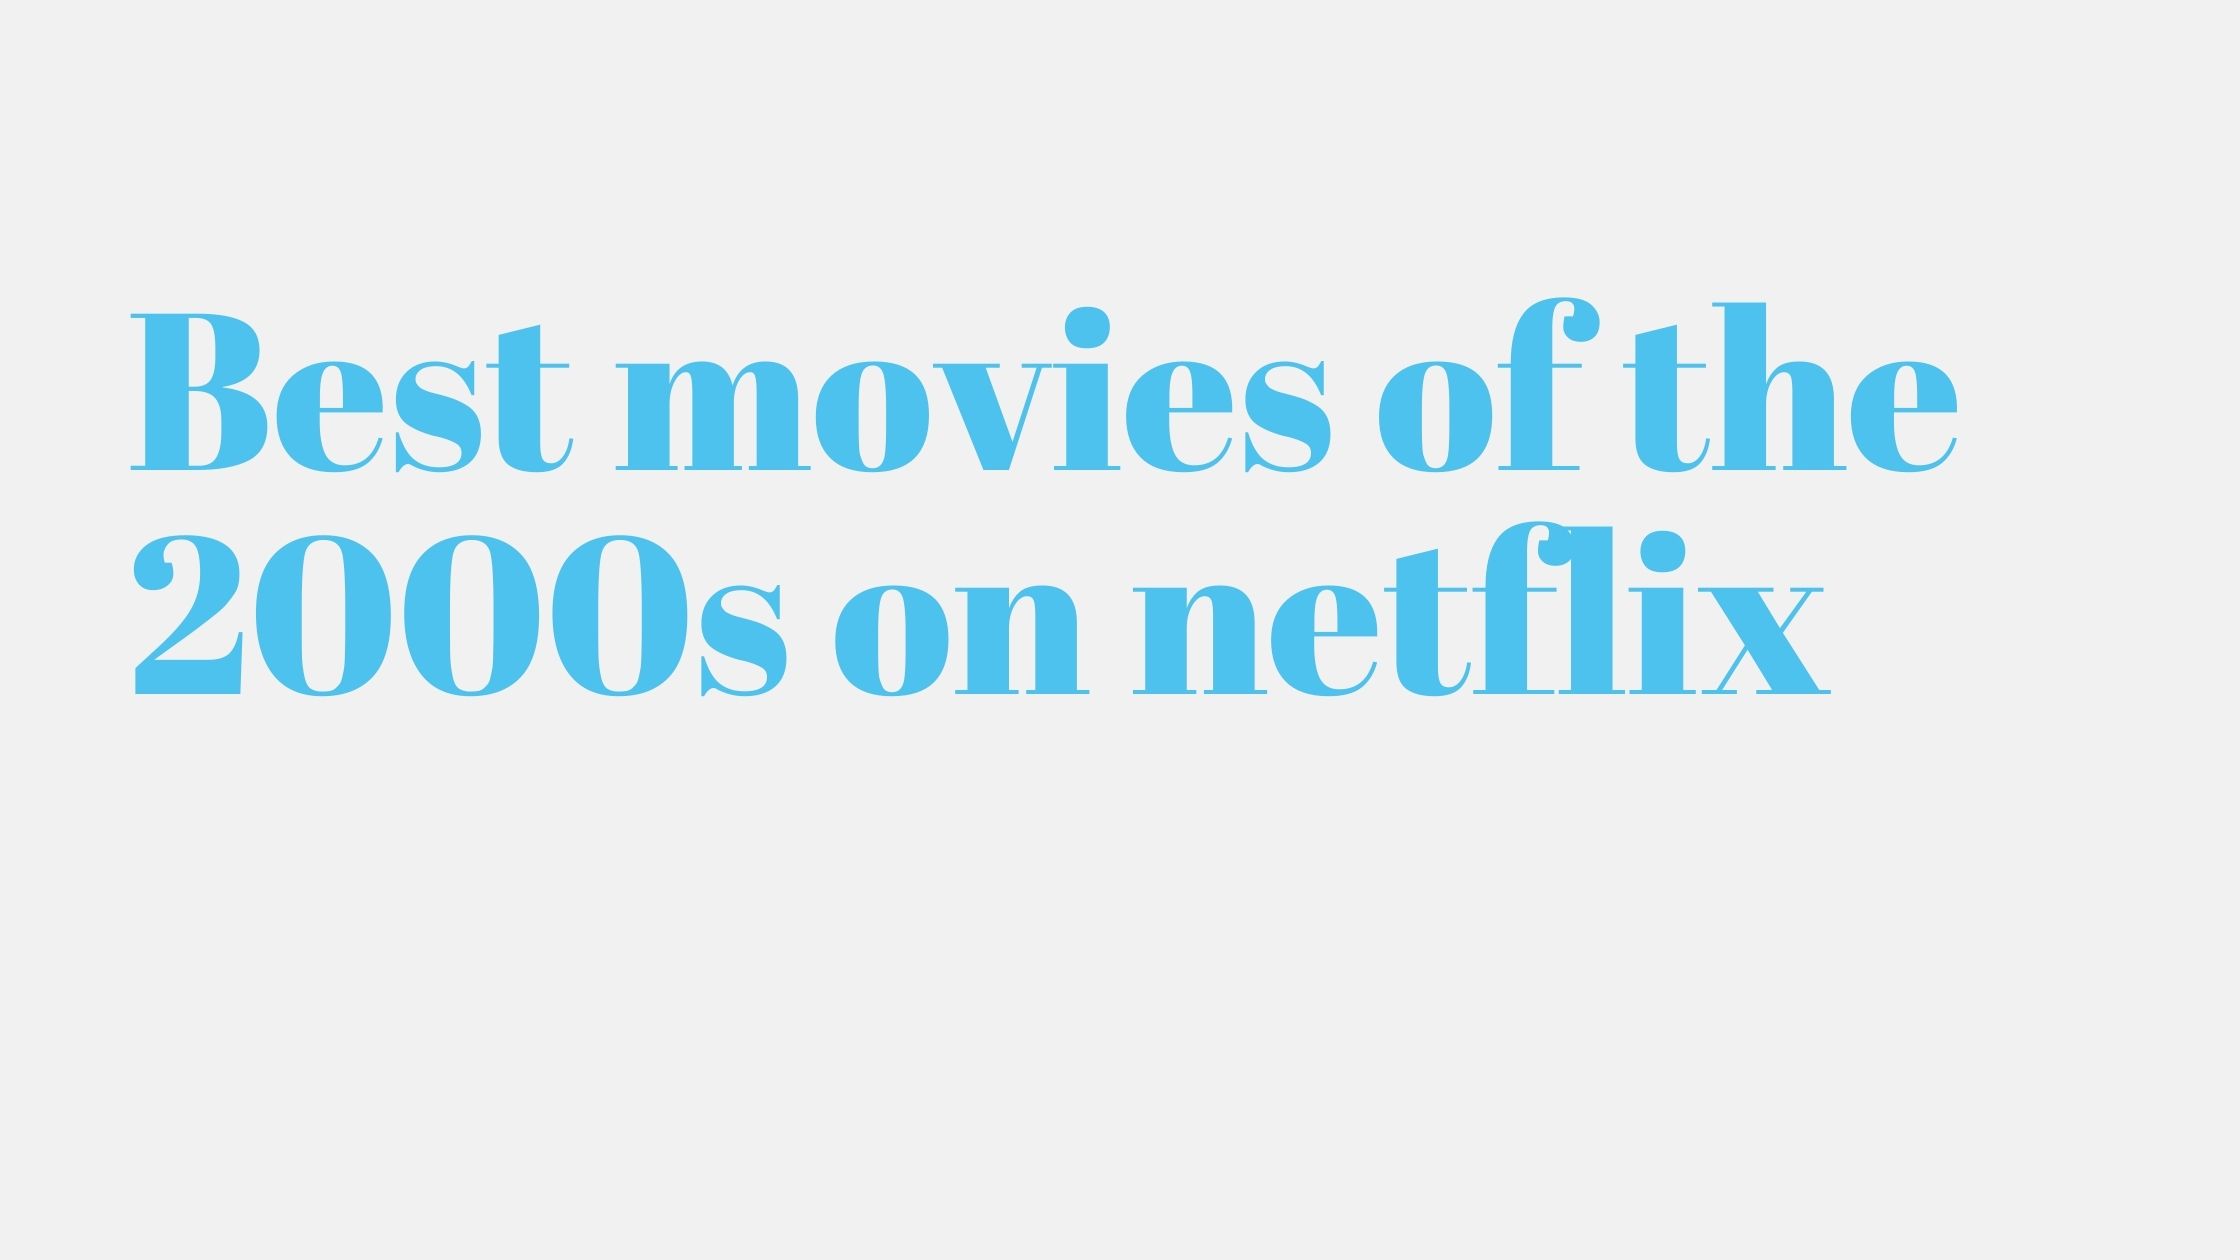 You are currently viewing 11 Best movies of the 2000s on netflix